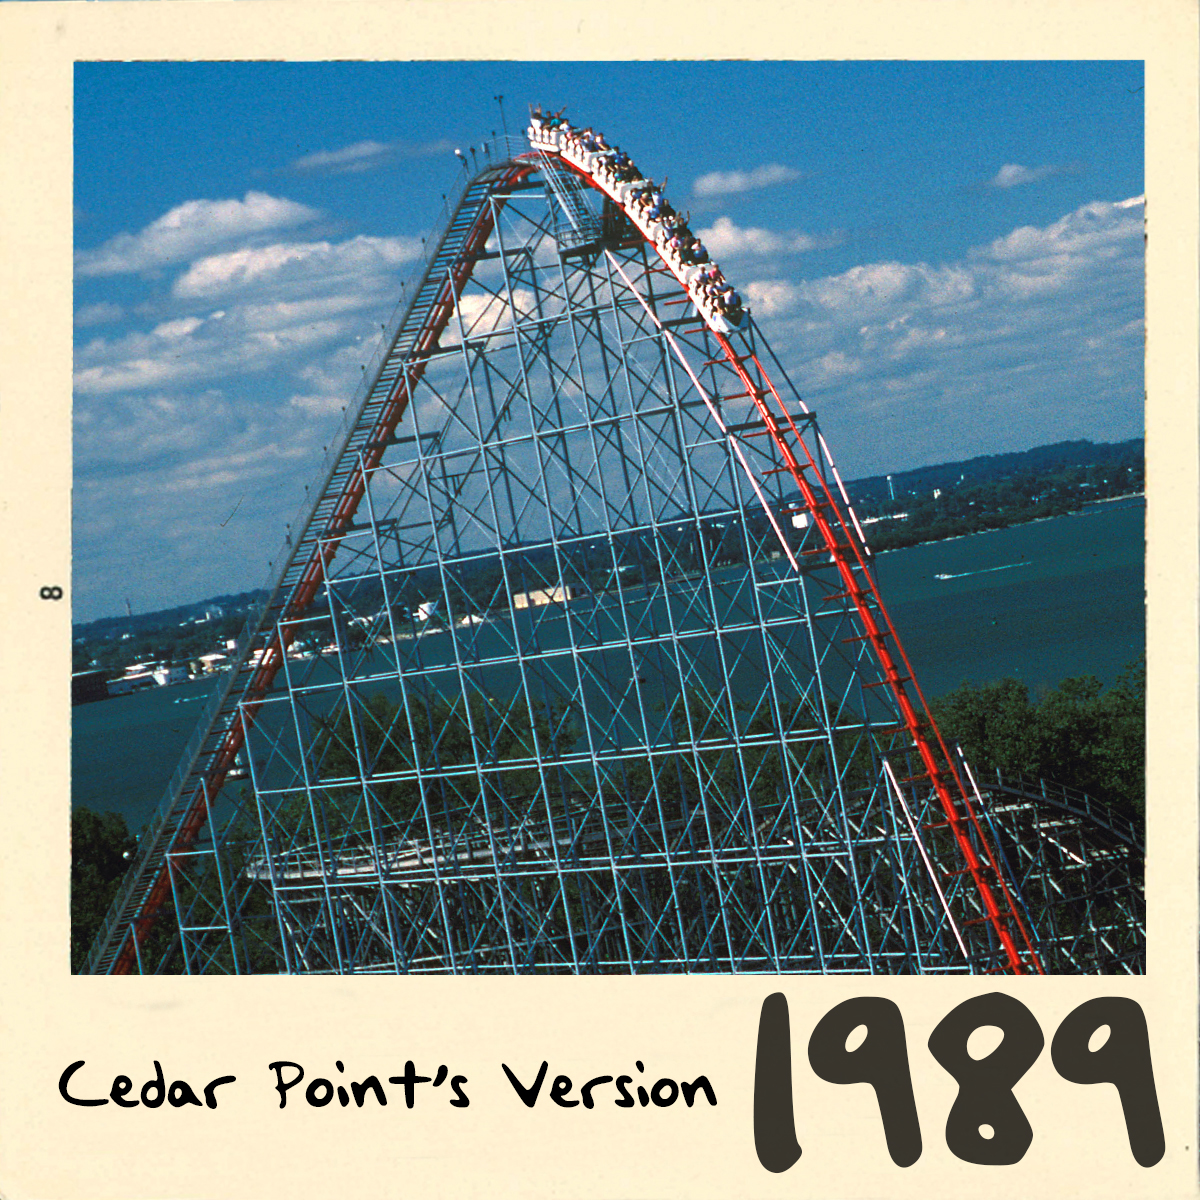 1989 (Cedar Point’s Version) 💙✨

Magnum XL-200, a coaster beyond our WILDEST DREAMS filled a BLANK SPACE on the peninsula as the world’s tallest and fastest hypercoaster in 1989.

Congrats @taylorswift13 on your version of 1989 TODAY! #1989TaylorsVersion